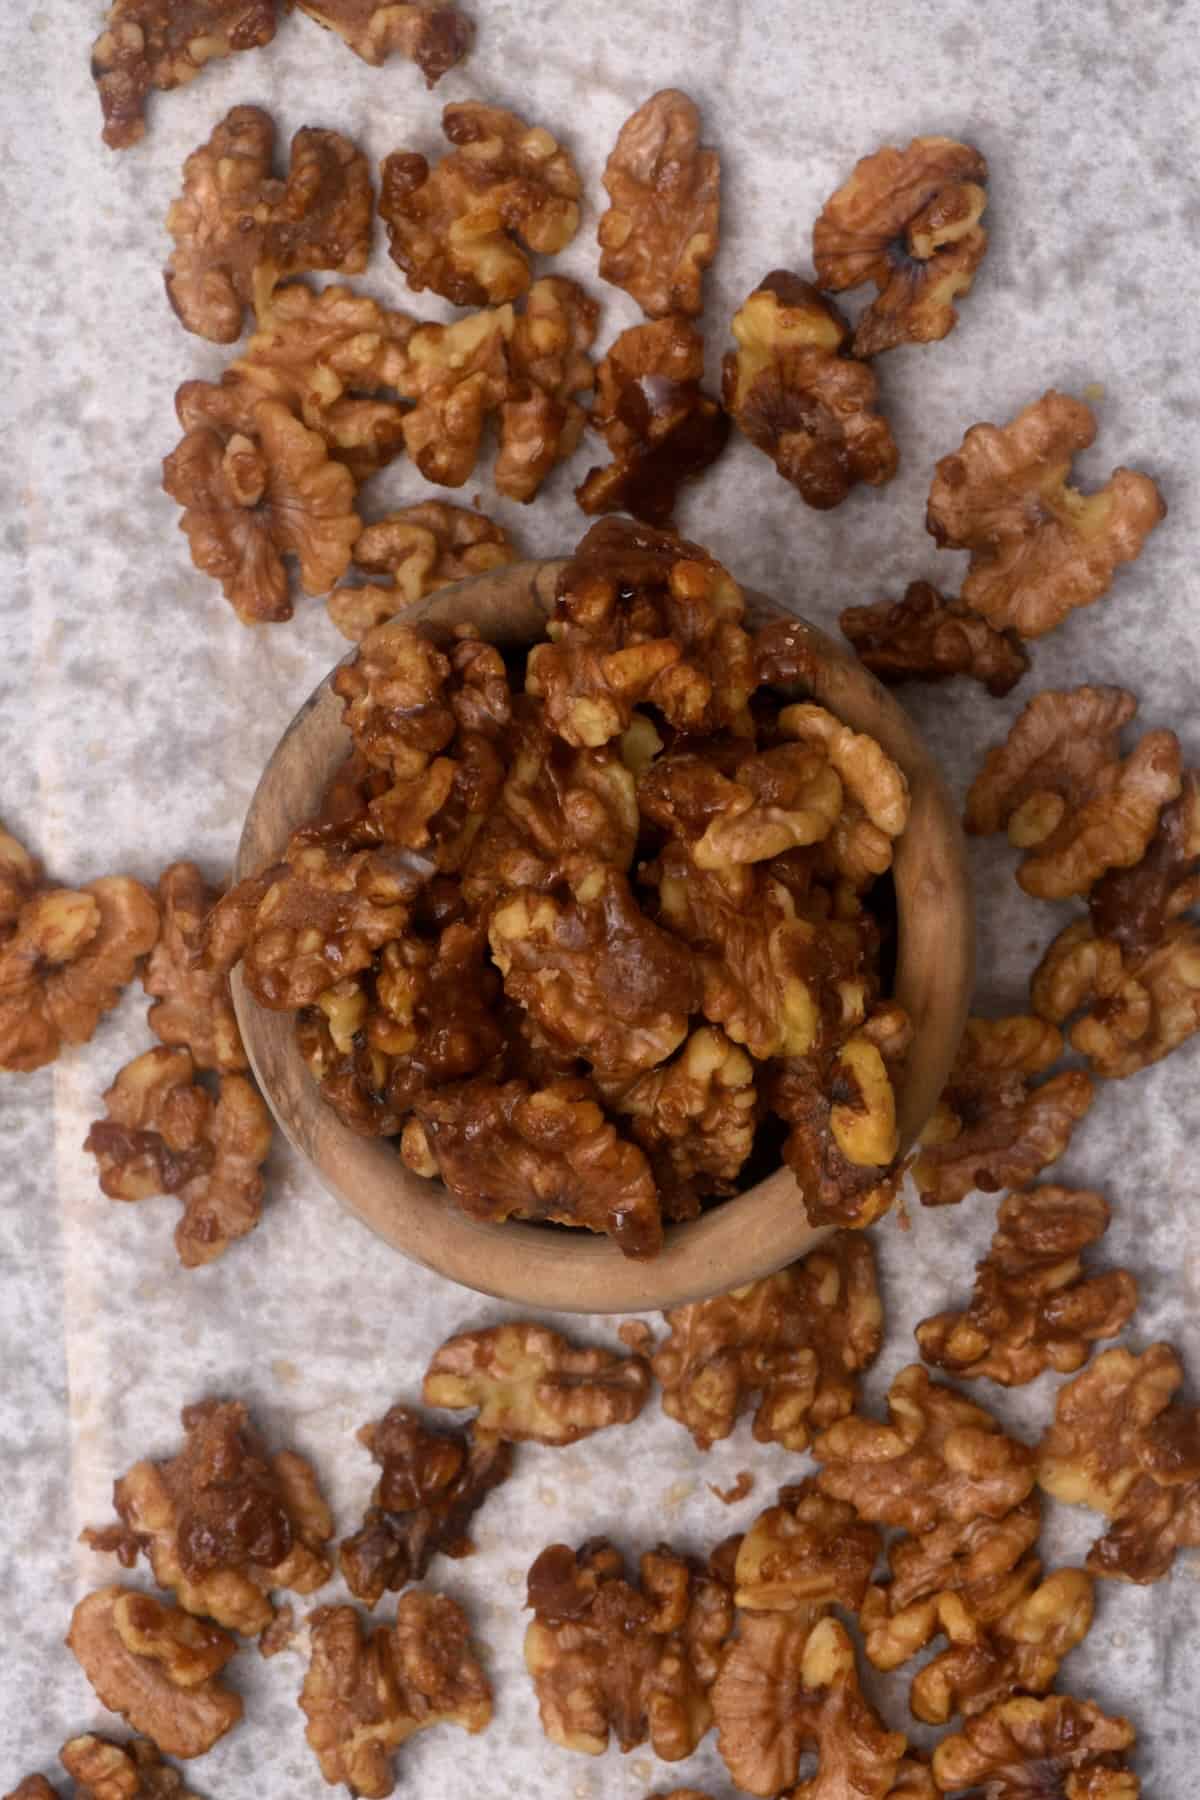 Homemade candied walnuts